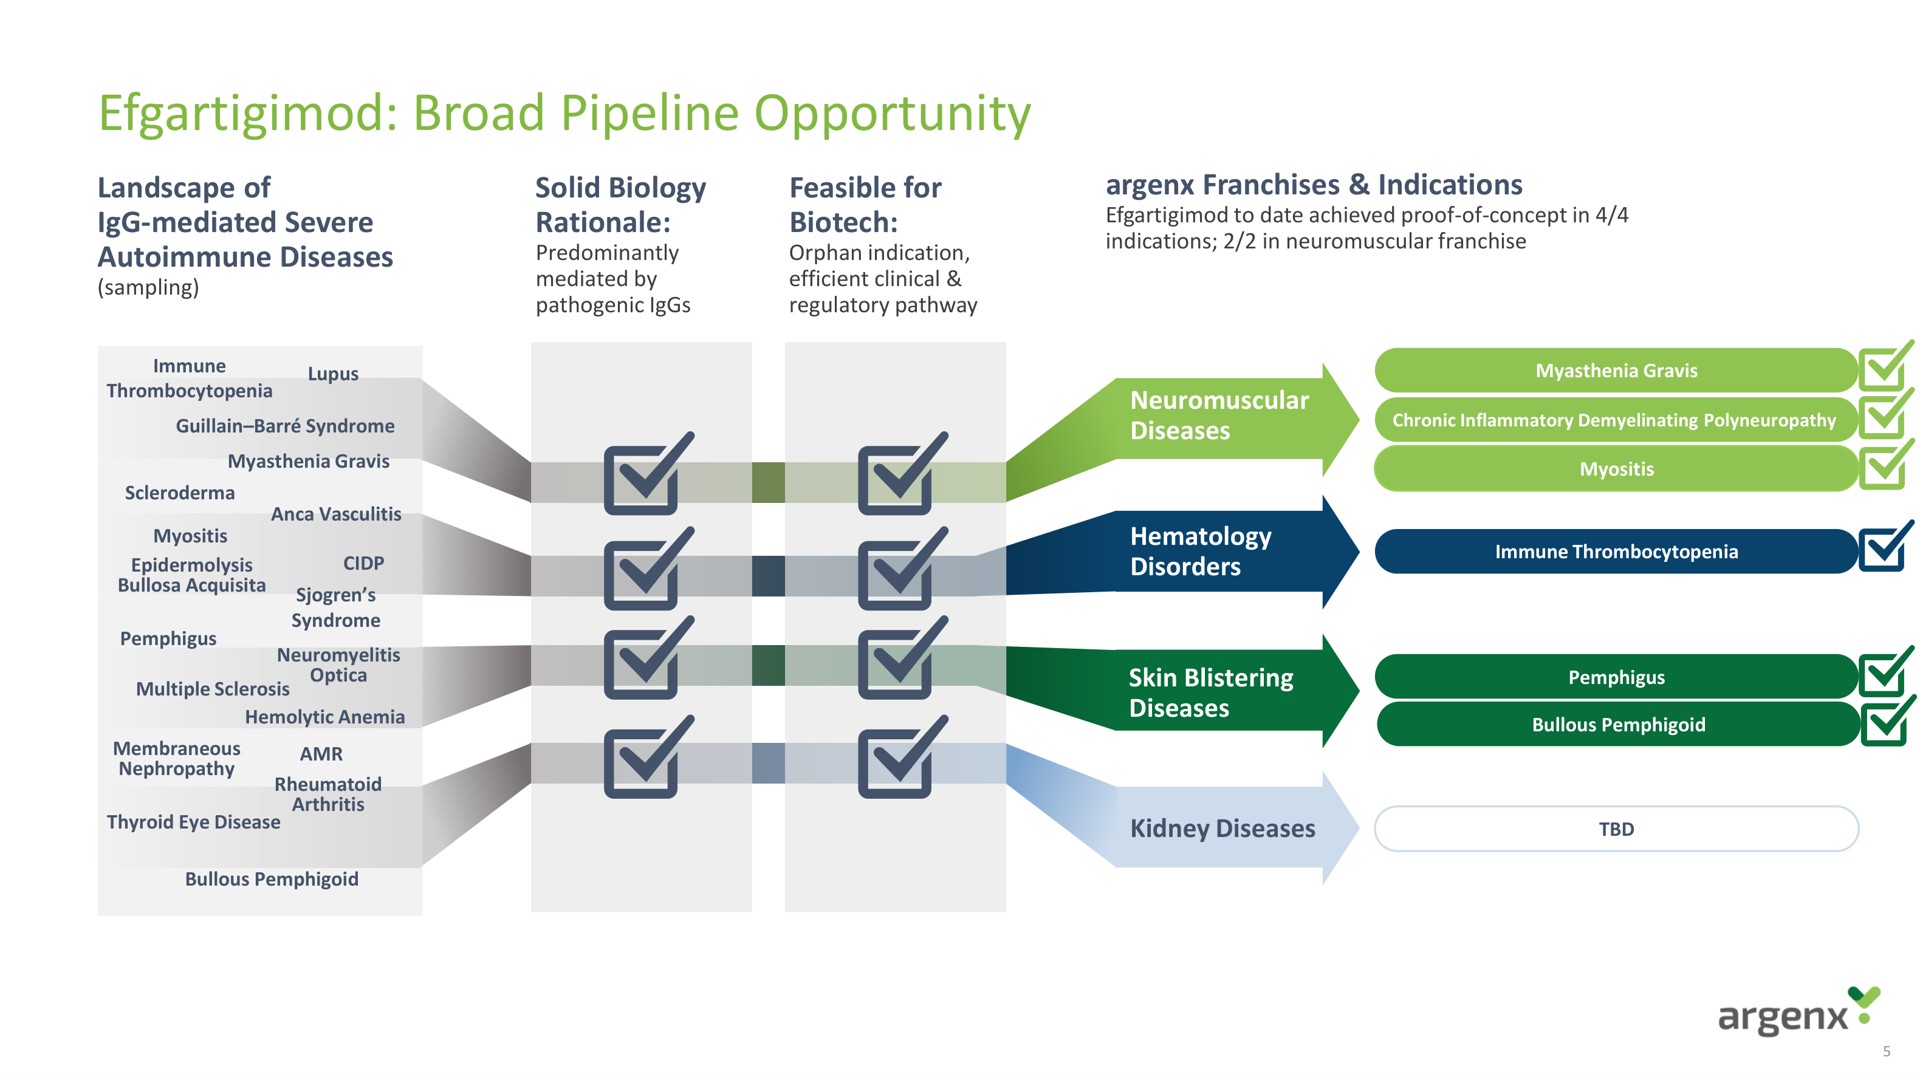 broad pipeline opportunity | argenx SE